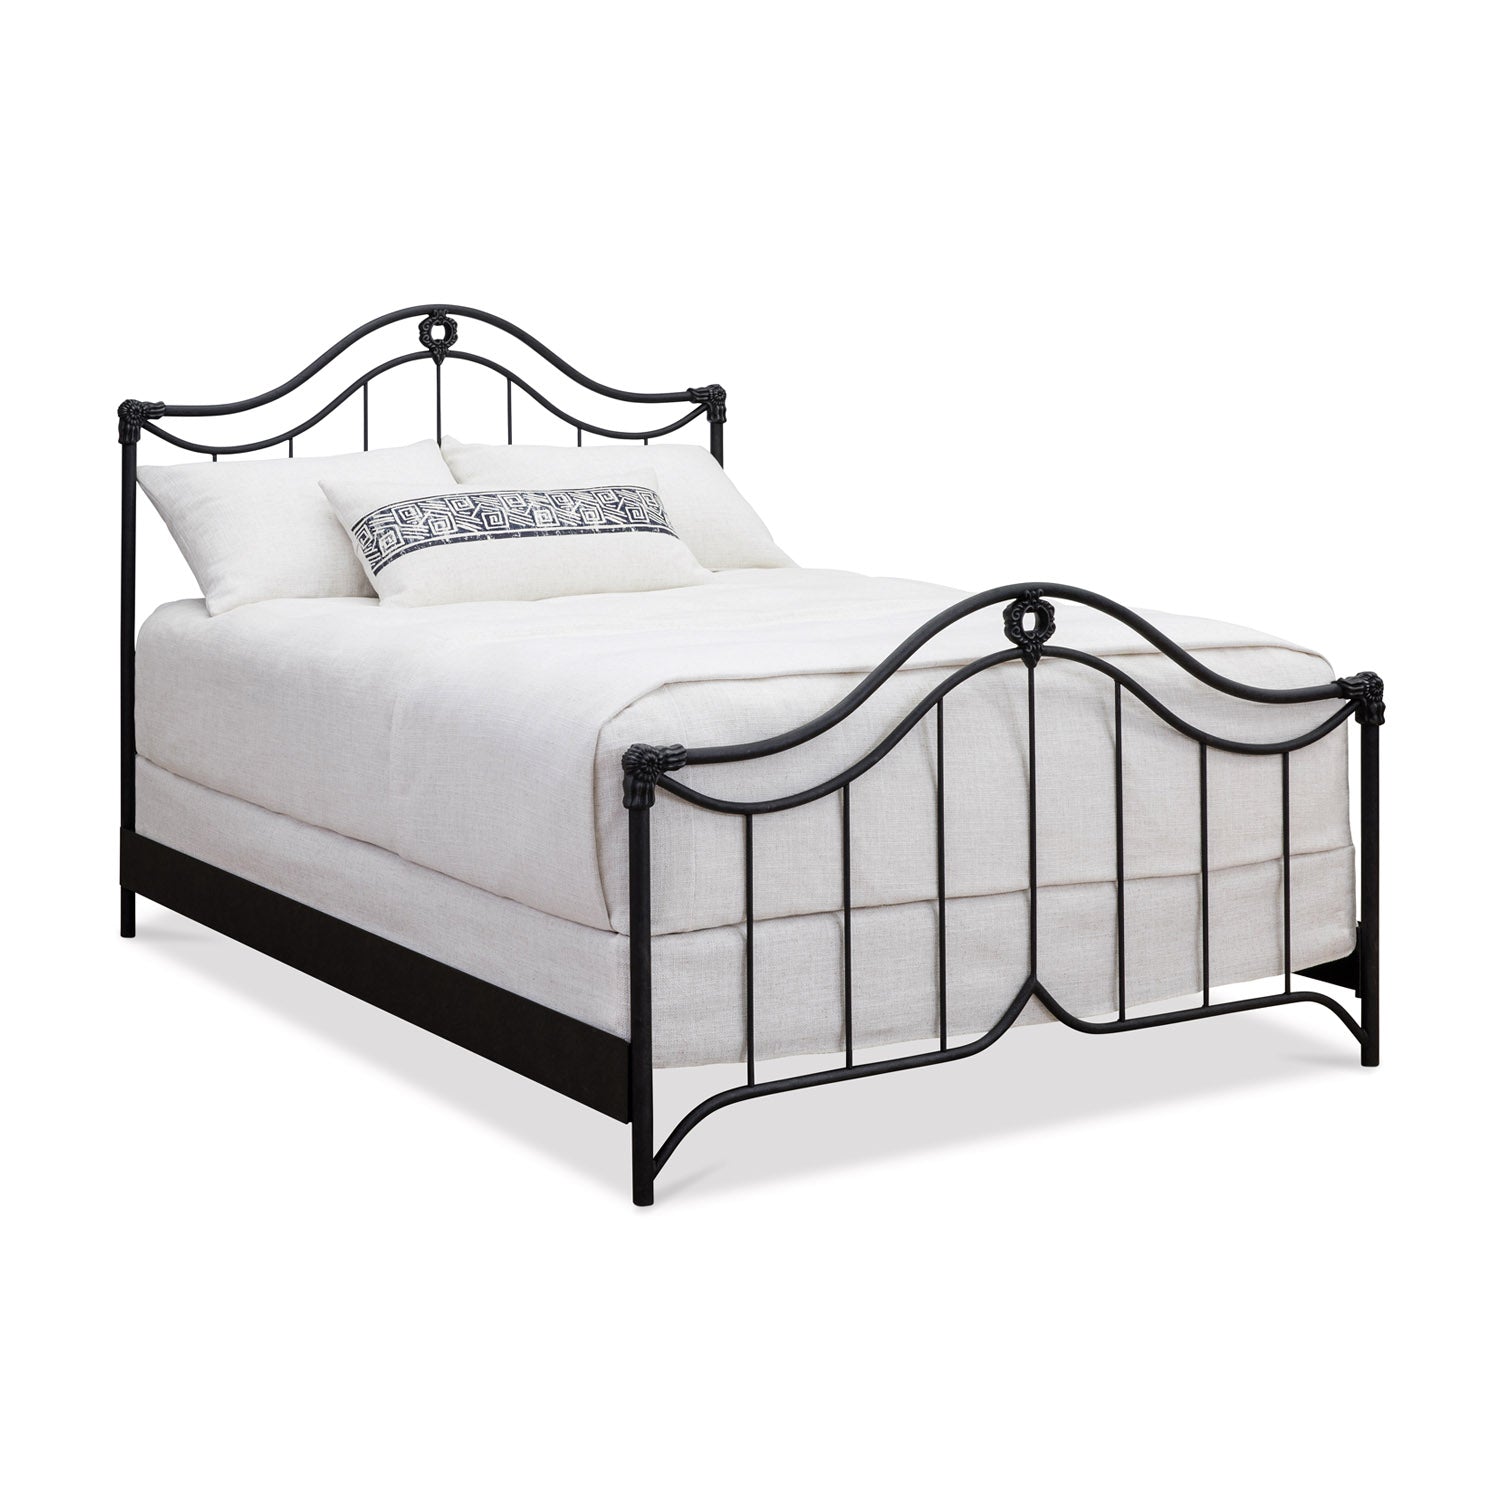 Montgomery Cast Iron Bed Frame